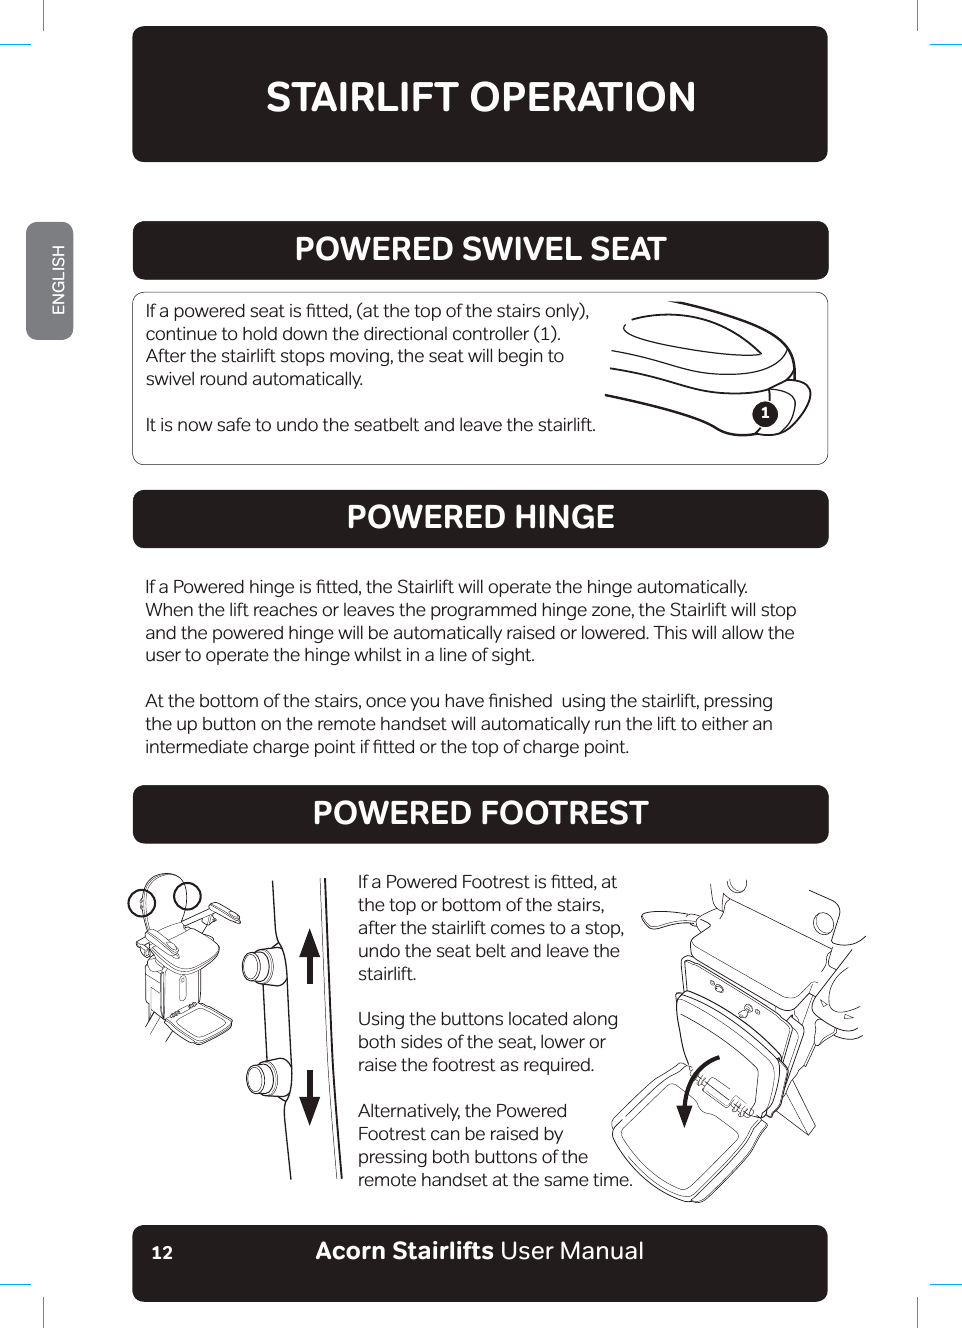 Acorn Stairlifts User ManualENGLISH12STAIRLIFT OPERATIONPOWERED SWIVEL SEATPOWERED HINGEPOWERED FOOTREST,IDSRZHUHGVHDWLVƷWWHGDWWKHWRSRIWKHVWDLUVRQO\continue to hold down the directional controller (1). After the stairlift stops moving, the seat will begin to swivel round automatically.  It is now safe to undo the seatbelt and leave the stairlift.,ID3RZHUHGKLQJHLVƷWWHGWKH6WDLUOLIWZLOORSHUDWHWKHKLQJHDXWRPDWLFDOO\When the lift reaches or leaves the programmed hinge zone, the Stairlift will stop and the powered hinge will be automatically raised or lowered. This will allow the user to operate the hinge whilst in a line of sight.$WWKHERWWRPRIWKHVWDLUVRQFH\RXKDYHƷQLVKHGXVLQJWKHVWDLUOLIWSUHVVLQJthe up button on the remote handset will automatically run the lift to either an LQWHUPHGLDWHFKDUJHSRLQWLIƷWWHGRUWKHWRSRIFKDUJHSRLQW ,ID3RZHUHG)RRWUHVWLVƷWWHGDWthe top or bottom of the stairs, after the stairlift comes to a stop, undo the seat belt and leave the stairlift. Using the buttons located along both sides of the seat, lower or raise the footrest as required. Alternatively, the Powered Footrest can be raised by pressing both buttons of the remote handset at the same time.1